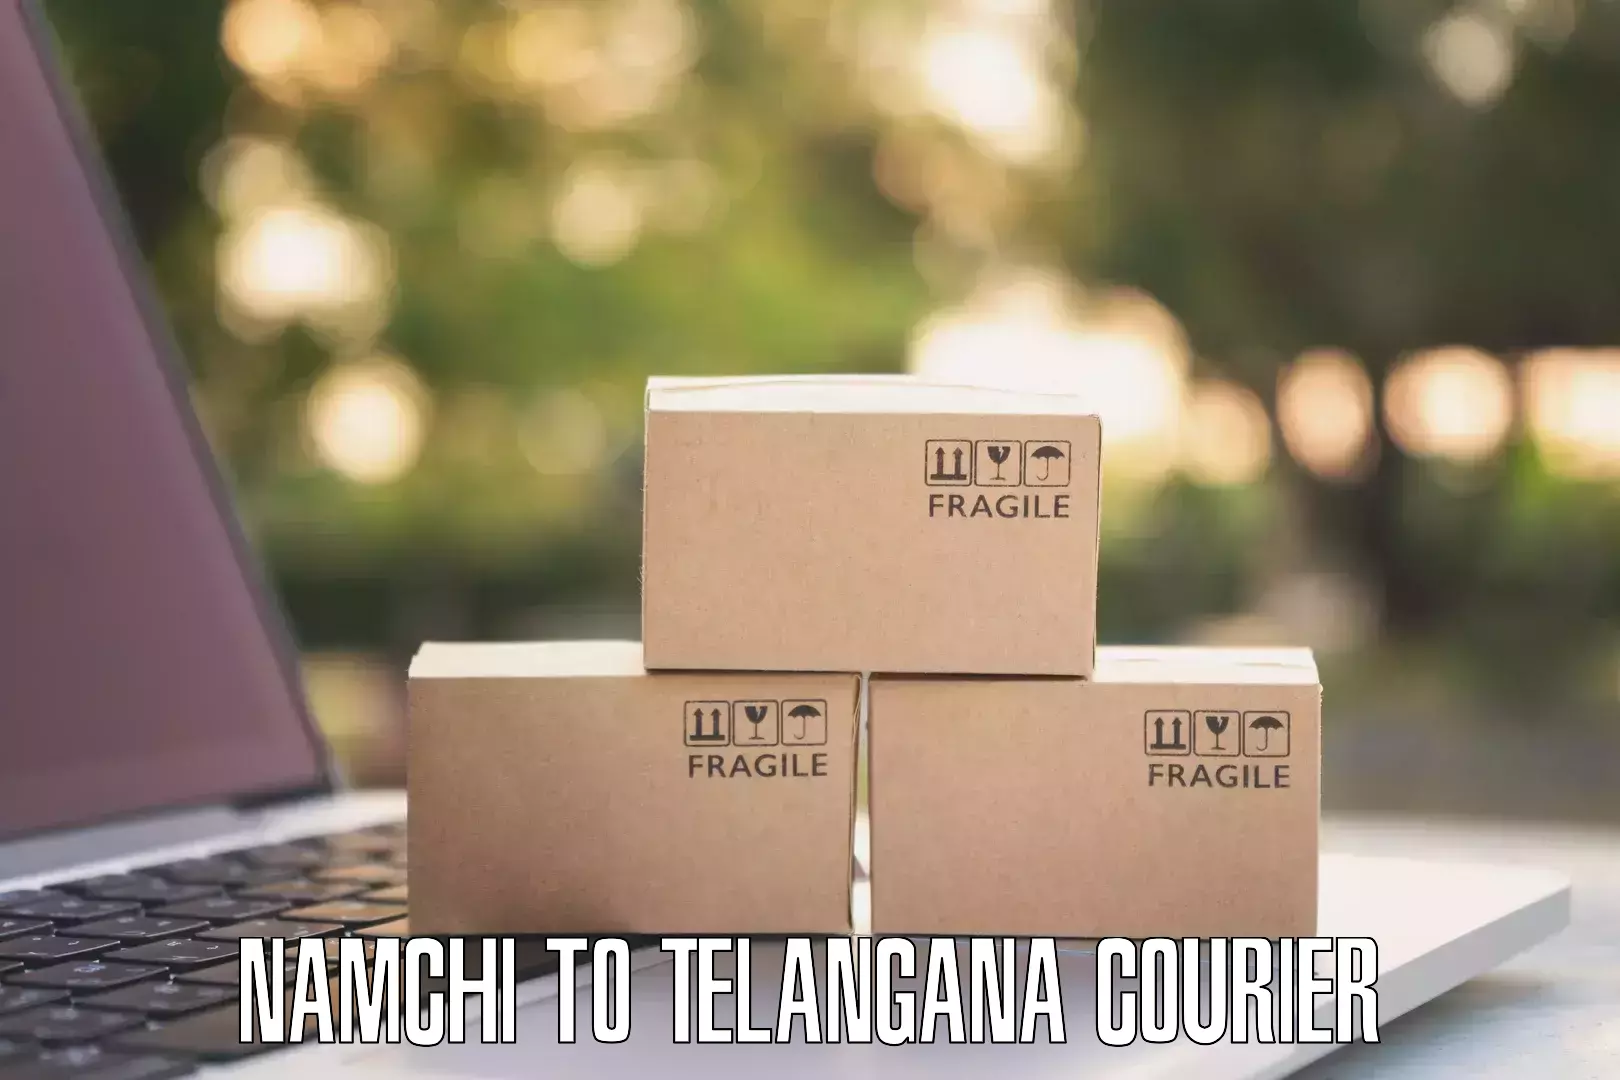 Online package tracking Namchi to Ghanpur